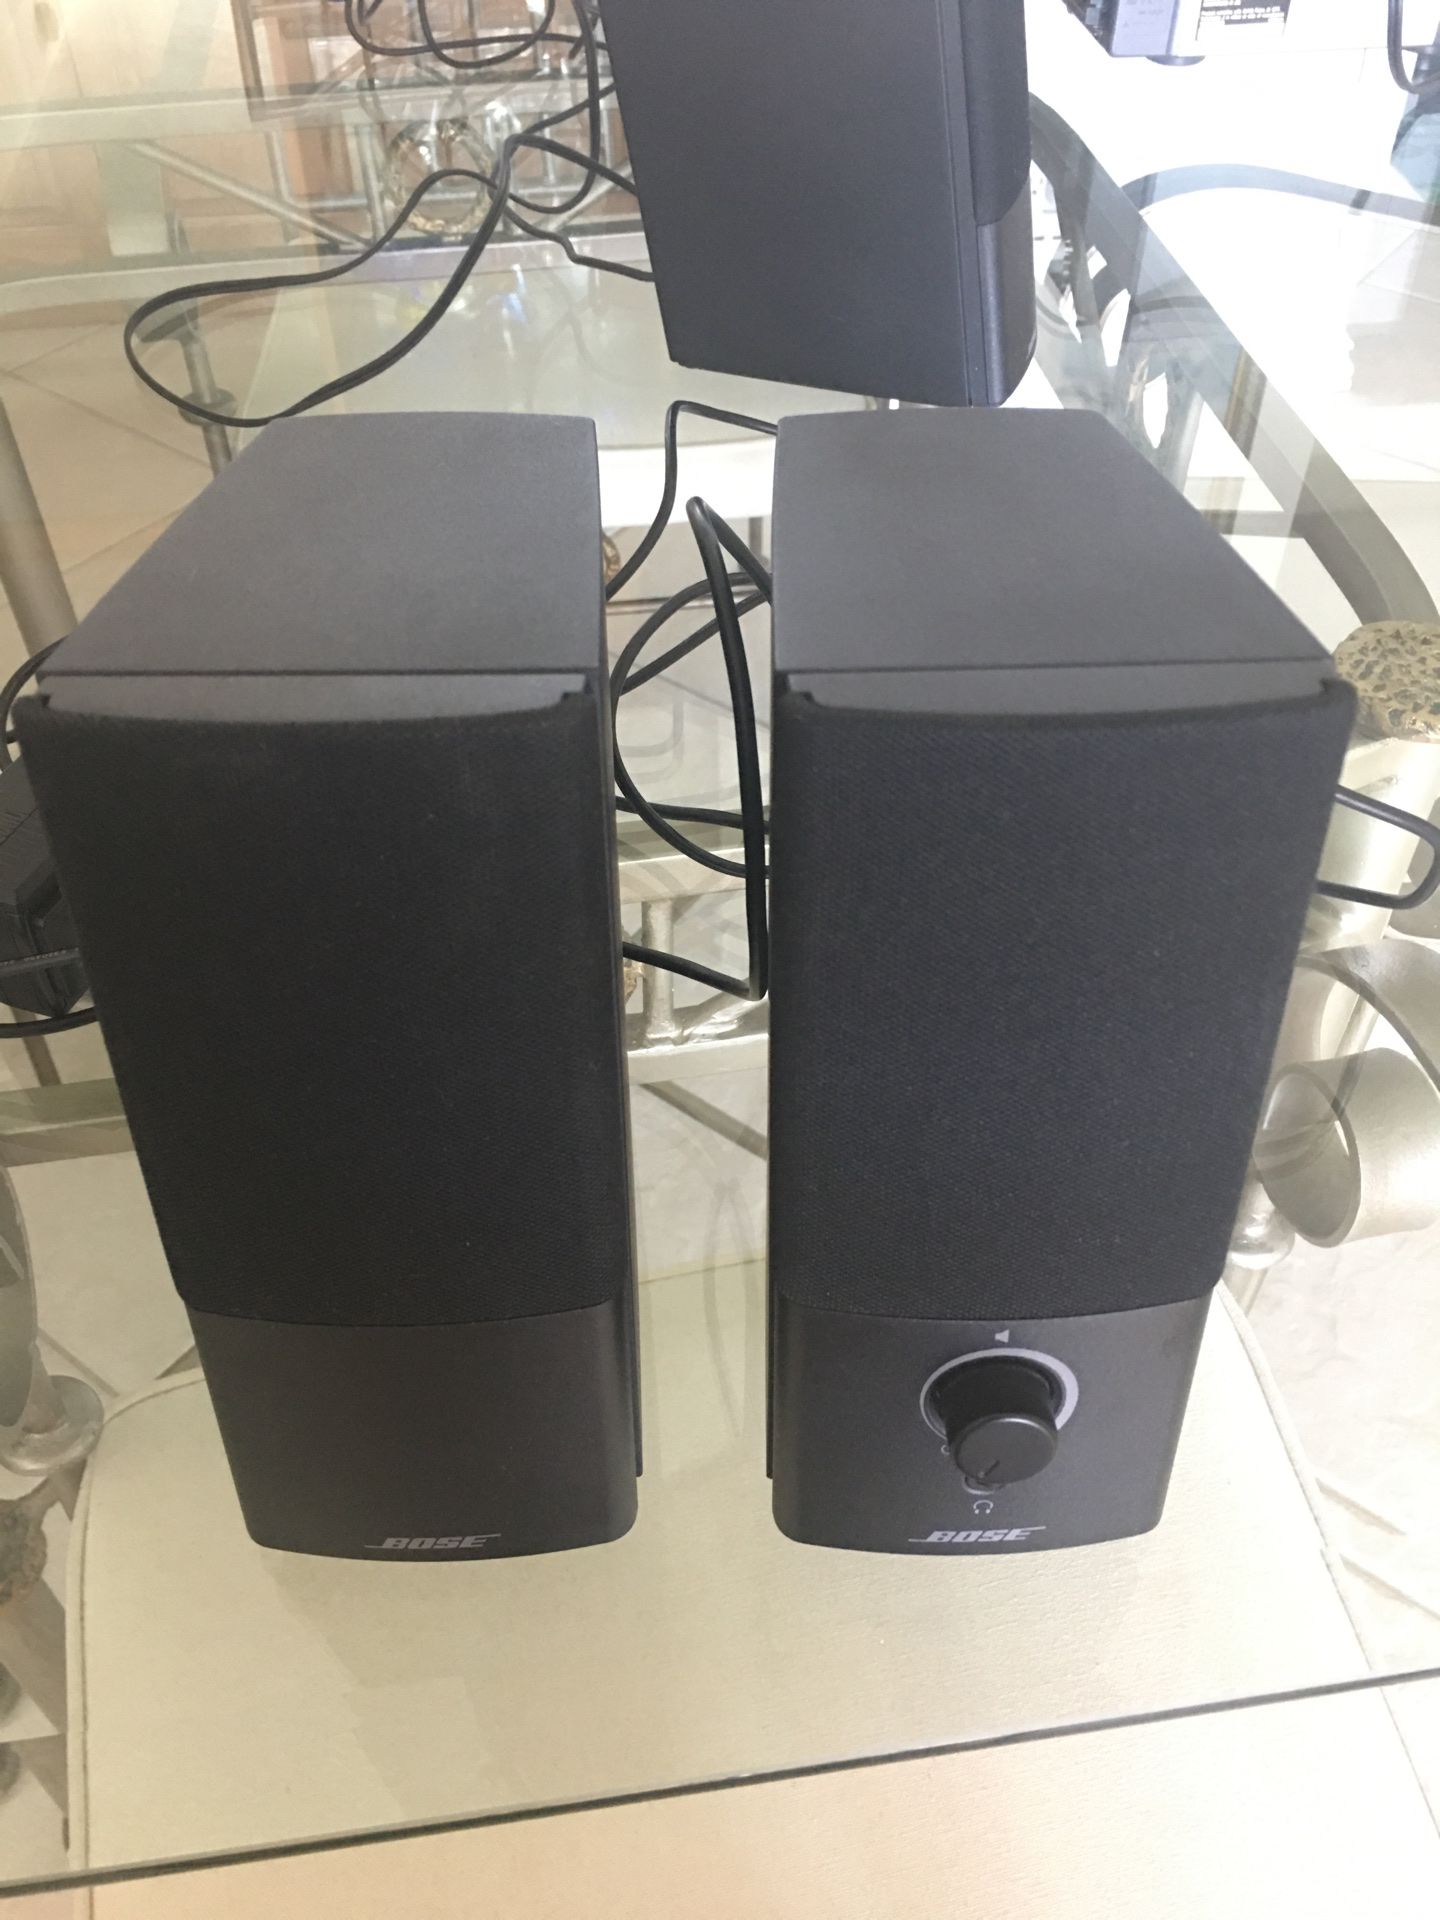 2 Bose computer/ console speakers like new.They don’t come with speakers wires.